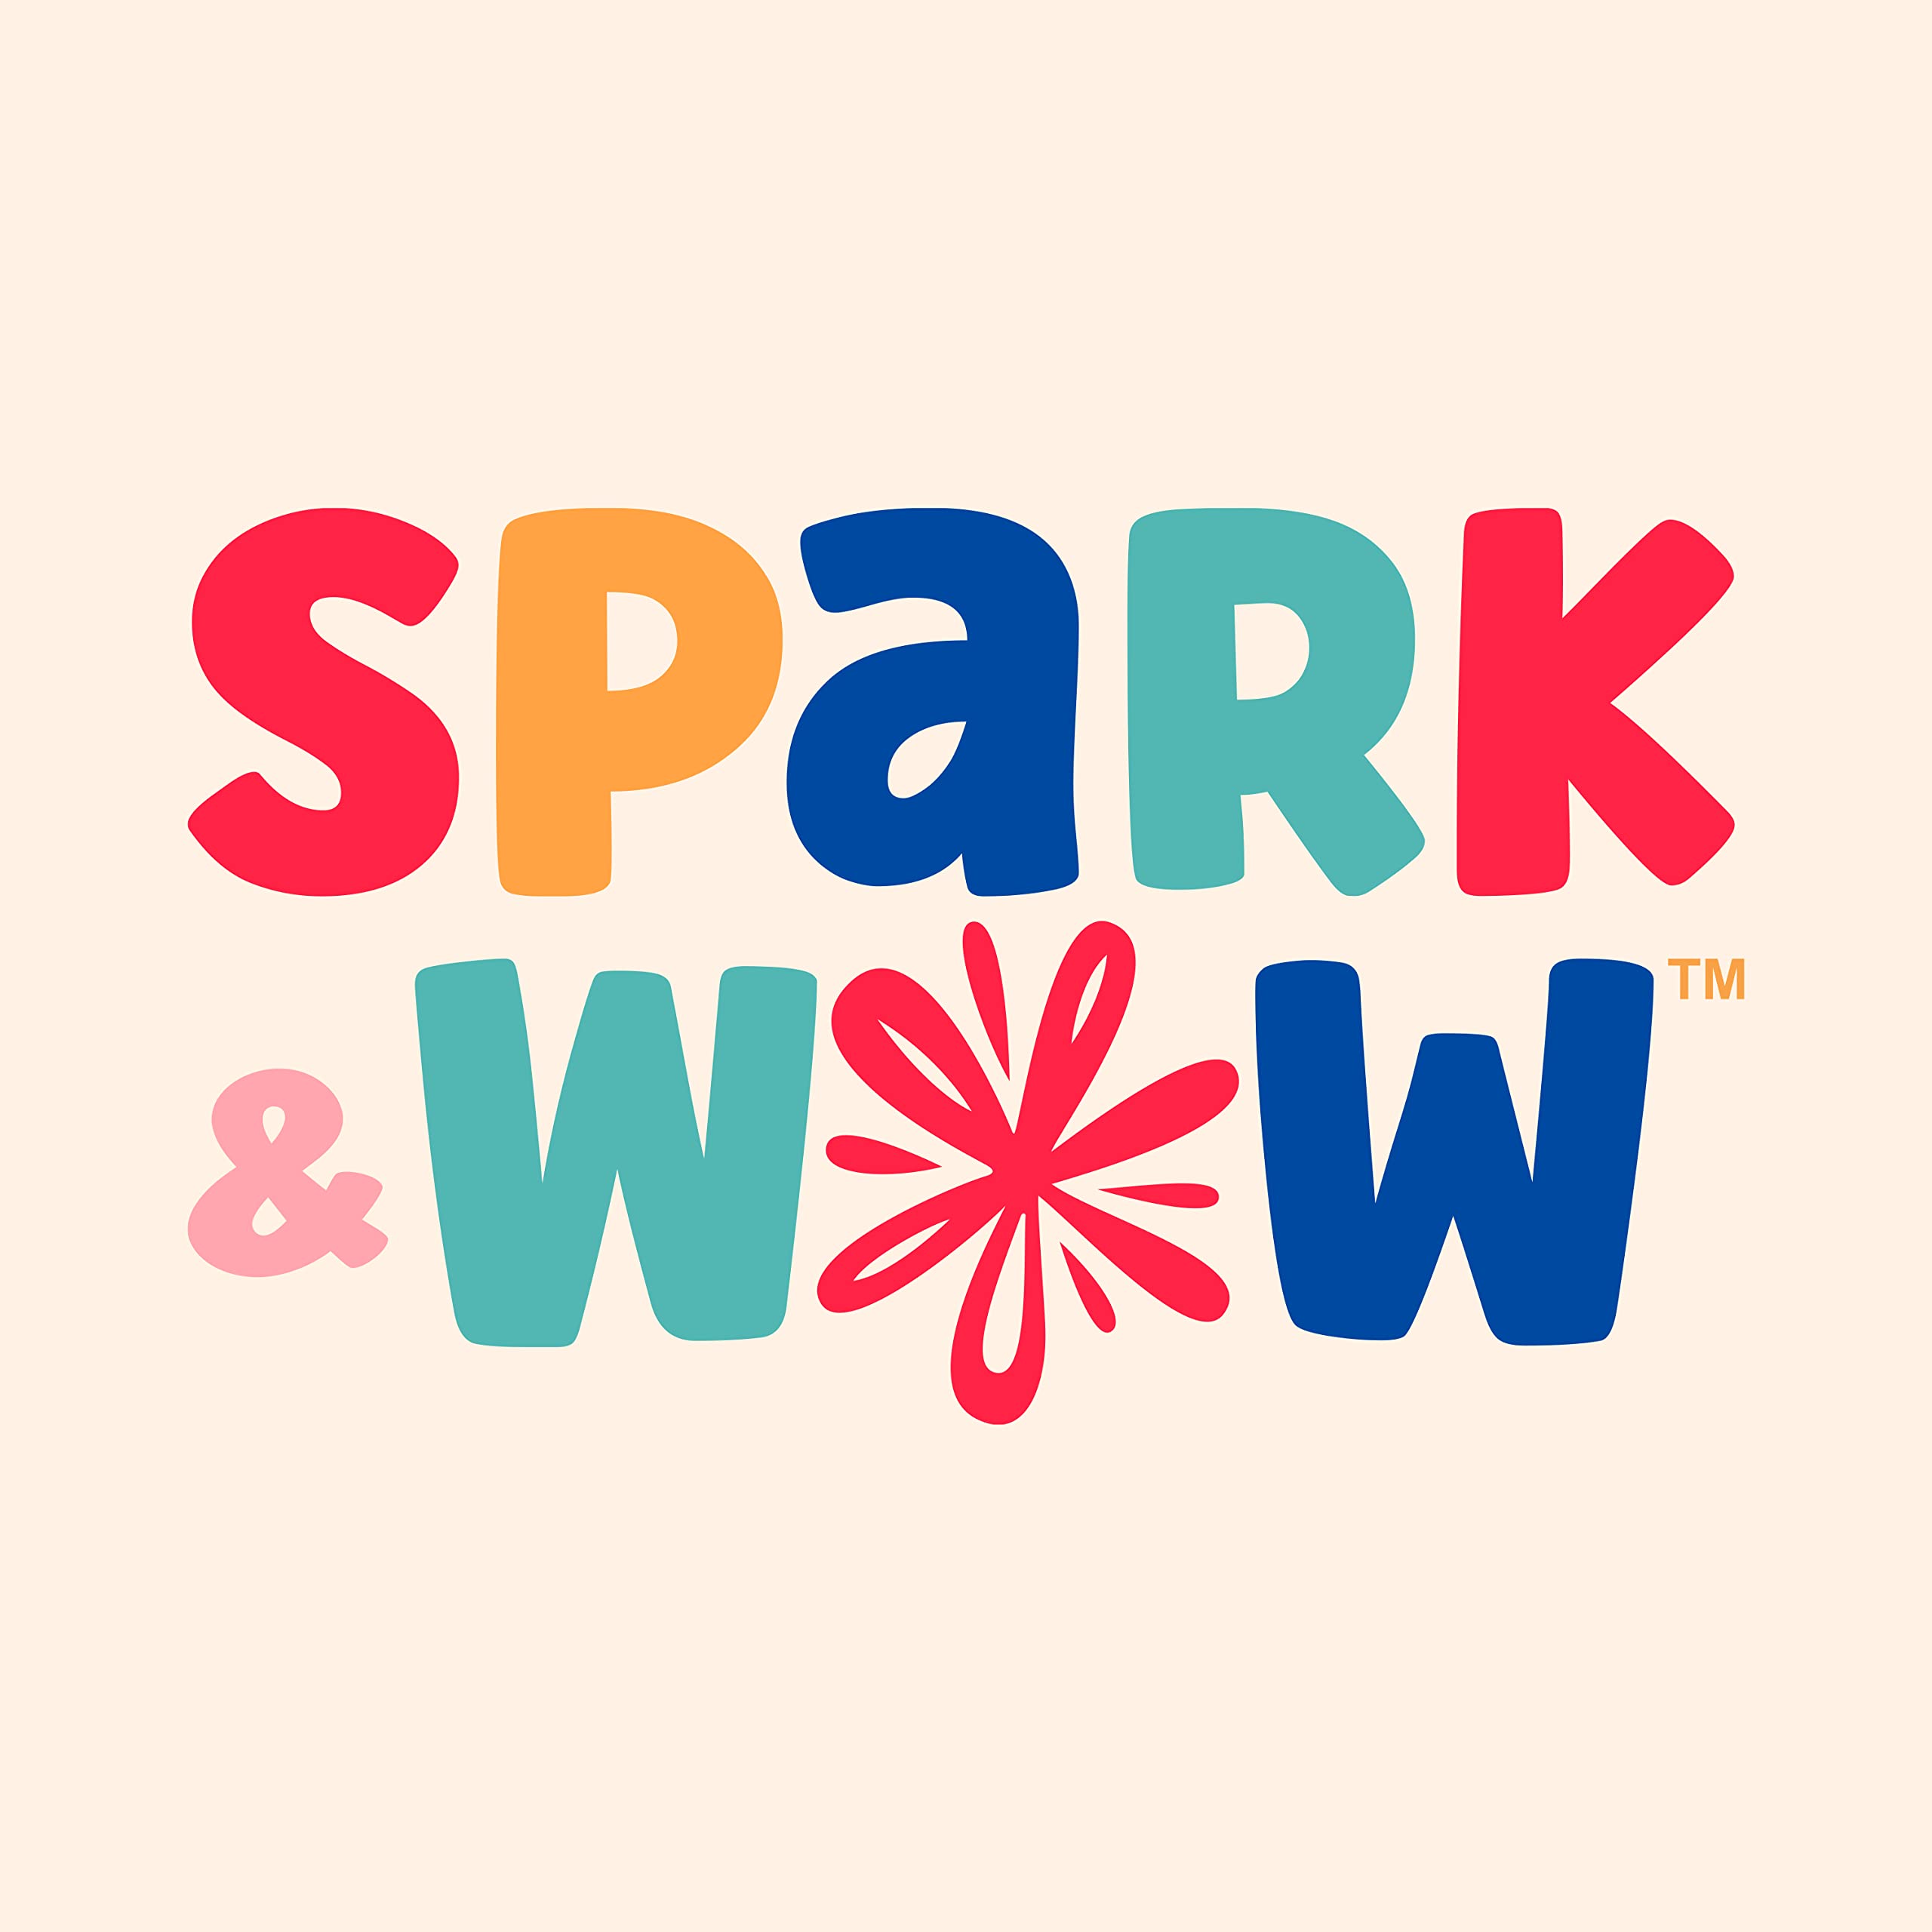 SPARK & WOW Wooden Magnets - Sea Life - Set of 20 - Magnets for Kids Ages 2+ - Cute Animal Magnets for The Fridge, Whiteboards and More